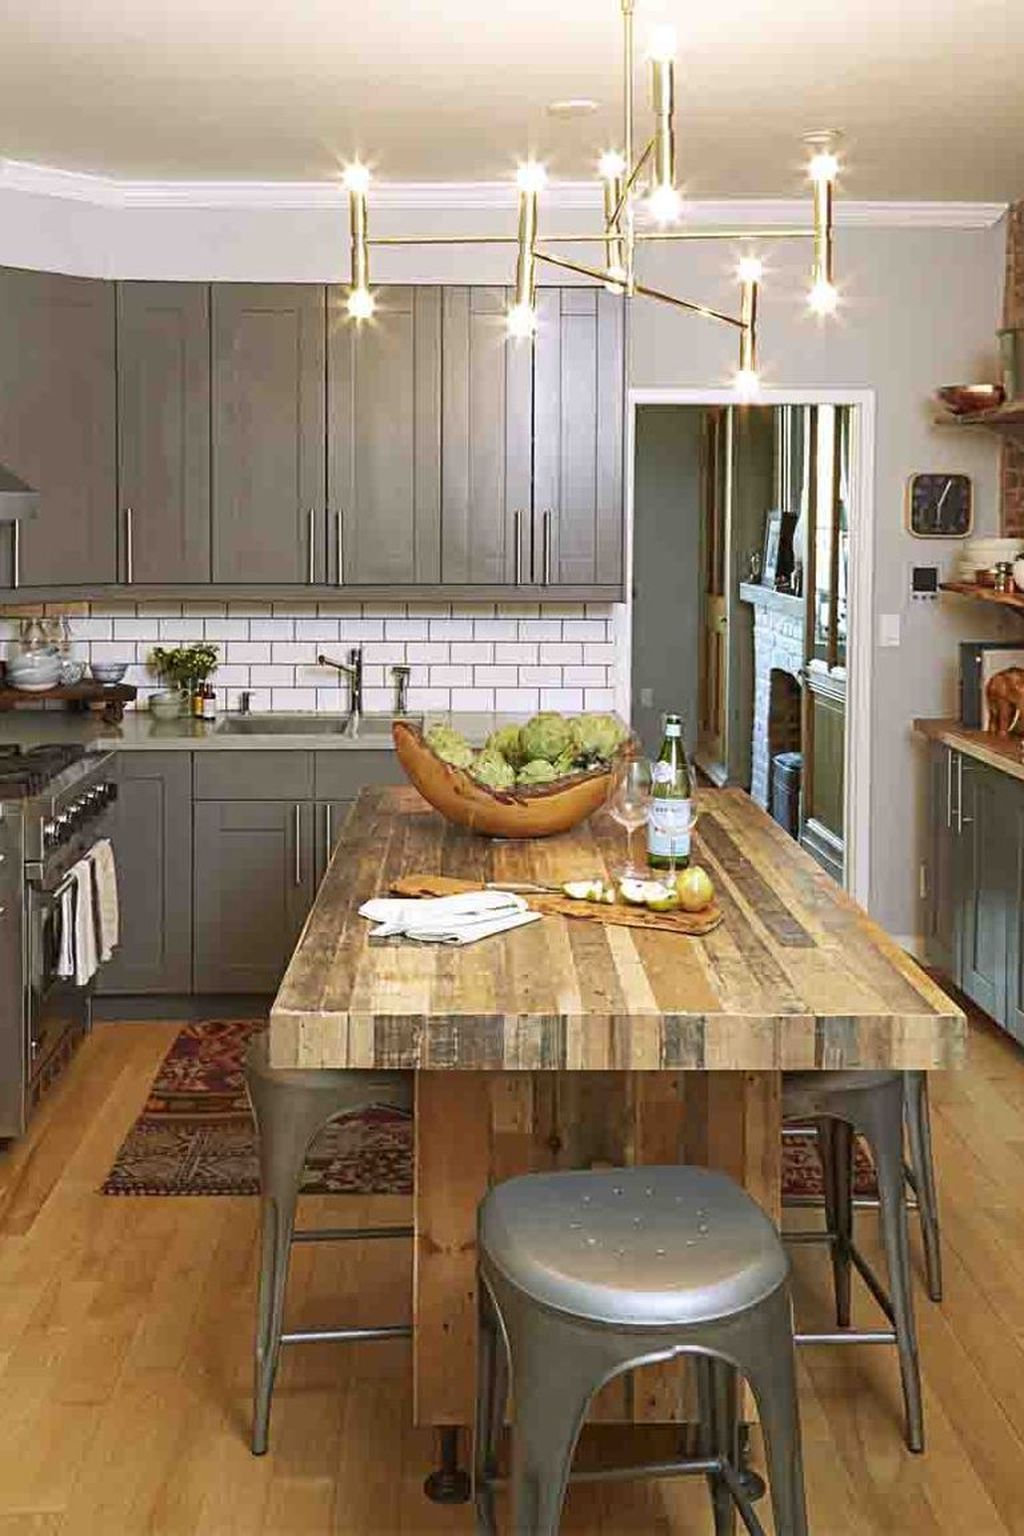 34 Gorgeous Small Kitchen And Dining Room Design Ideas - PIMPHOMEE